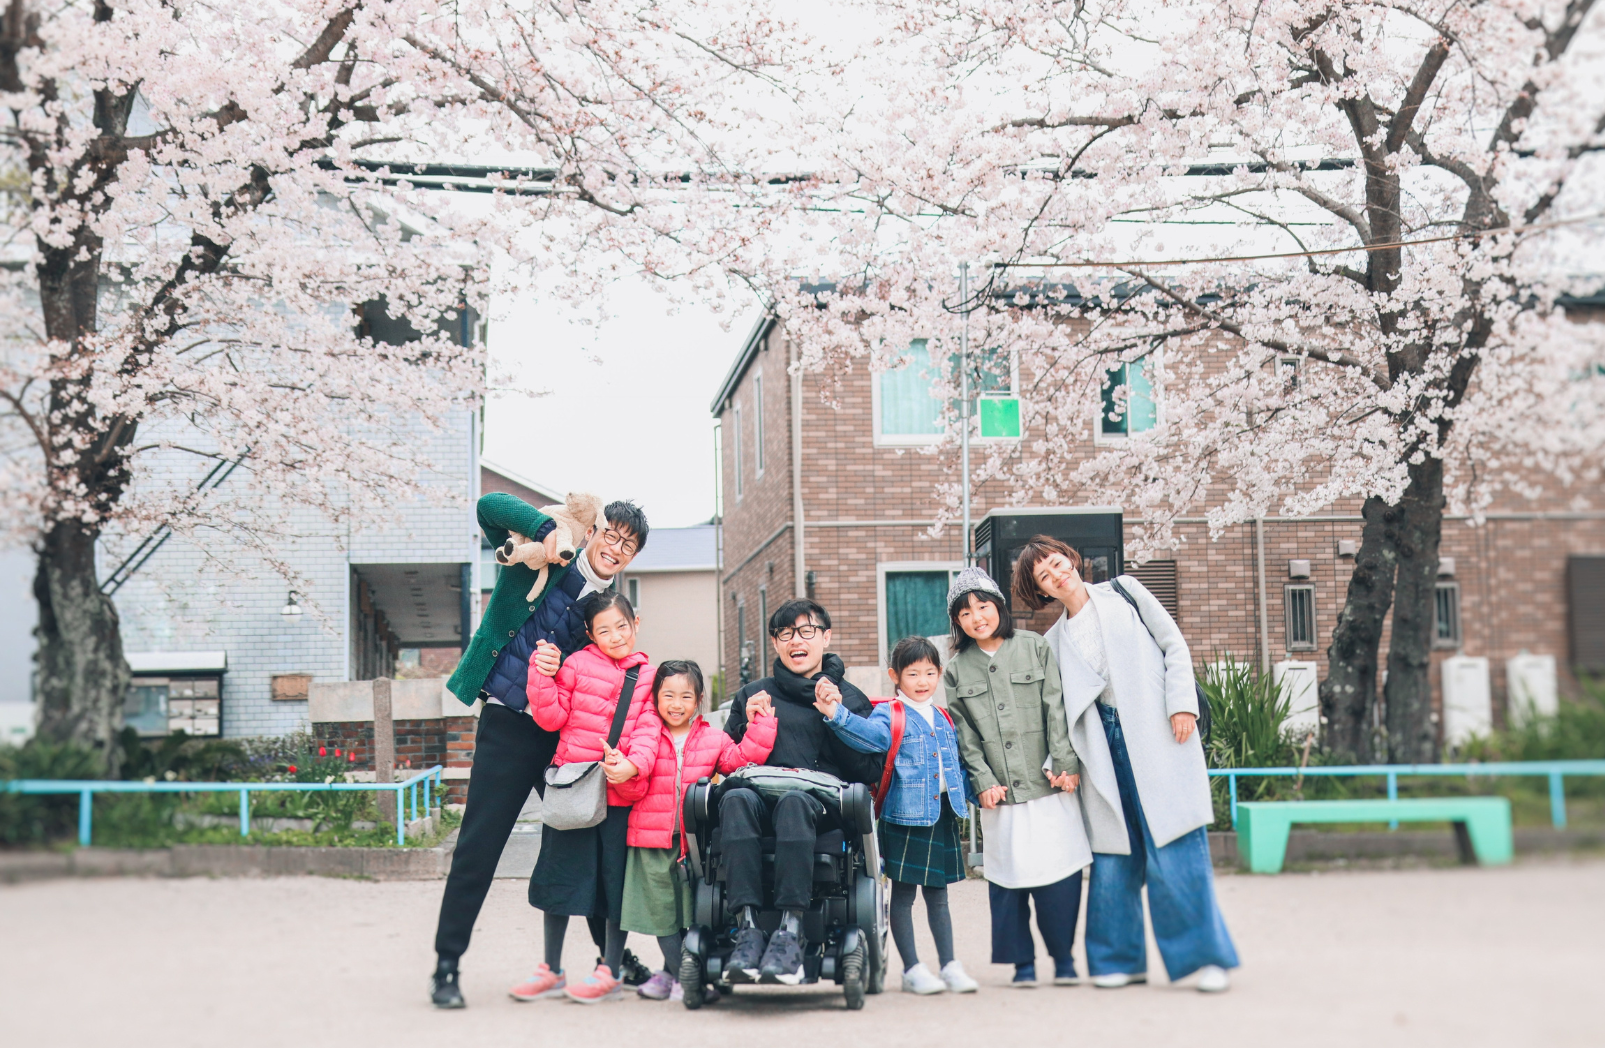 a group of people are posing for a picture in front of cherry blossom trees .